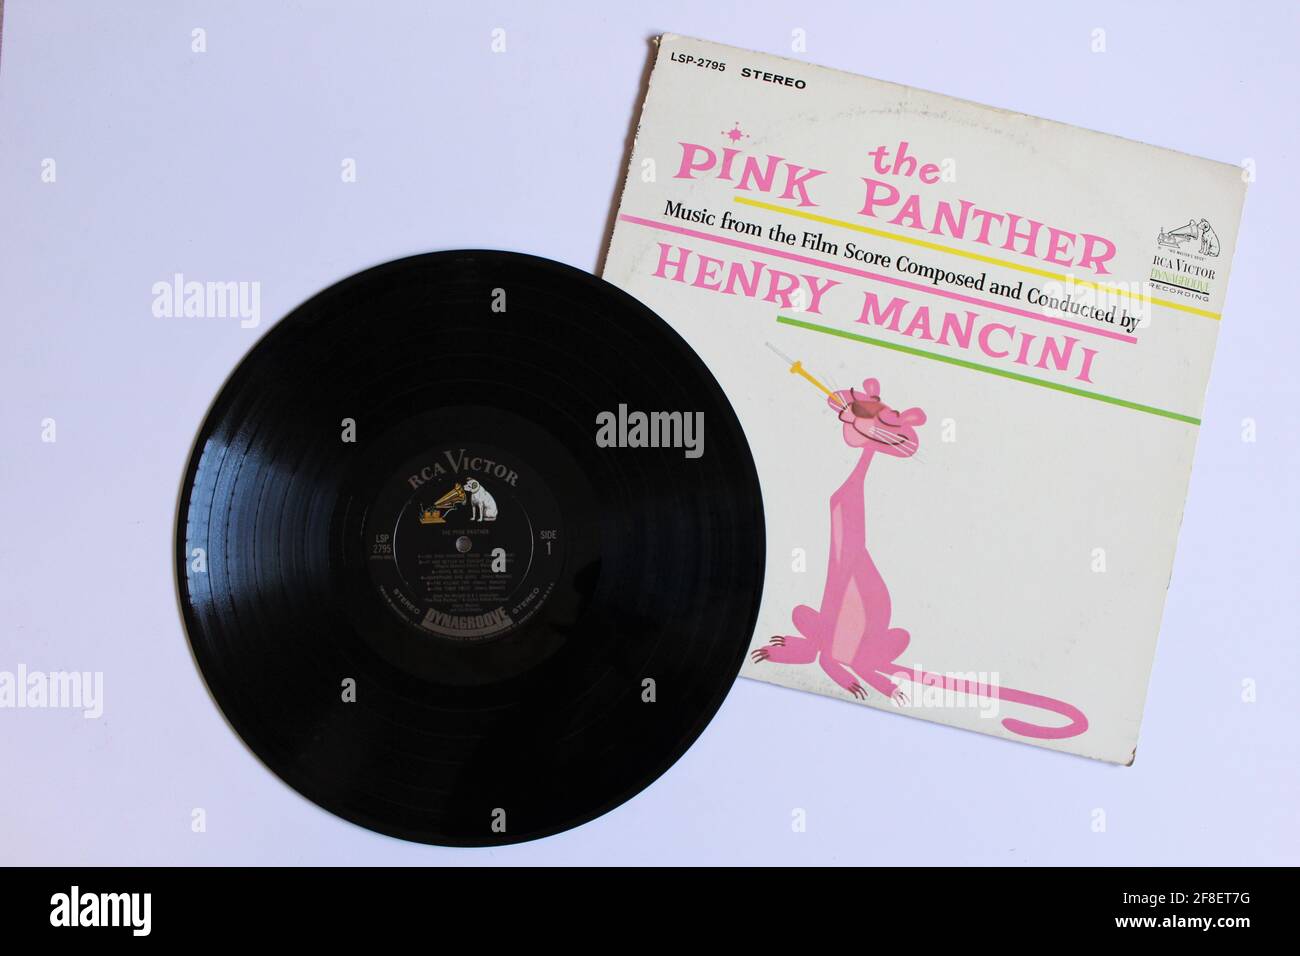 The Pink Panther Theme is an instrumental composition by Henry Mancini written theme for the 1963 film The Pink Panther. Music album on vinyl record Stock Photo